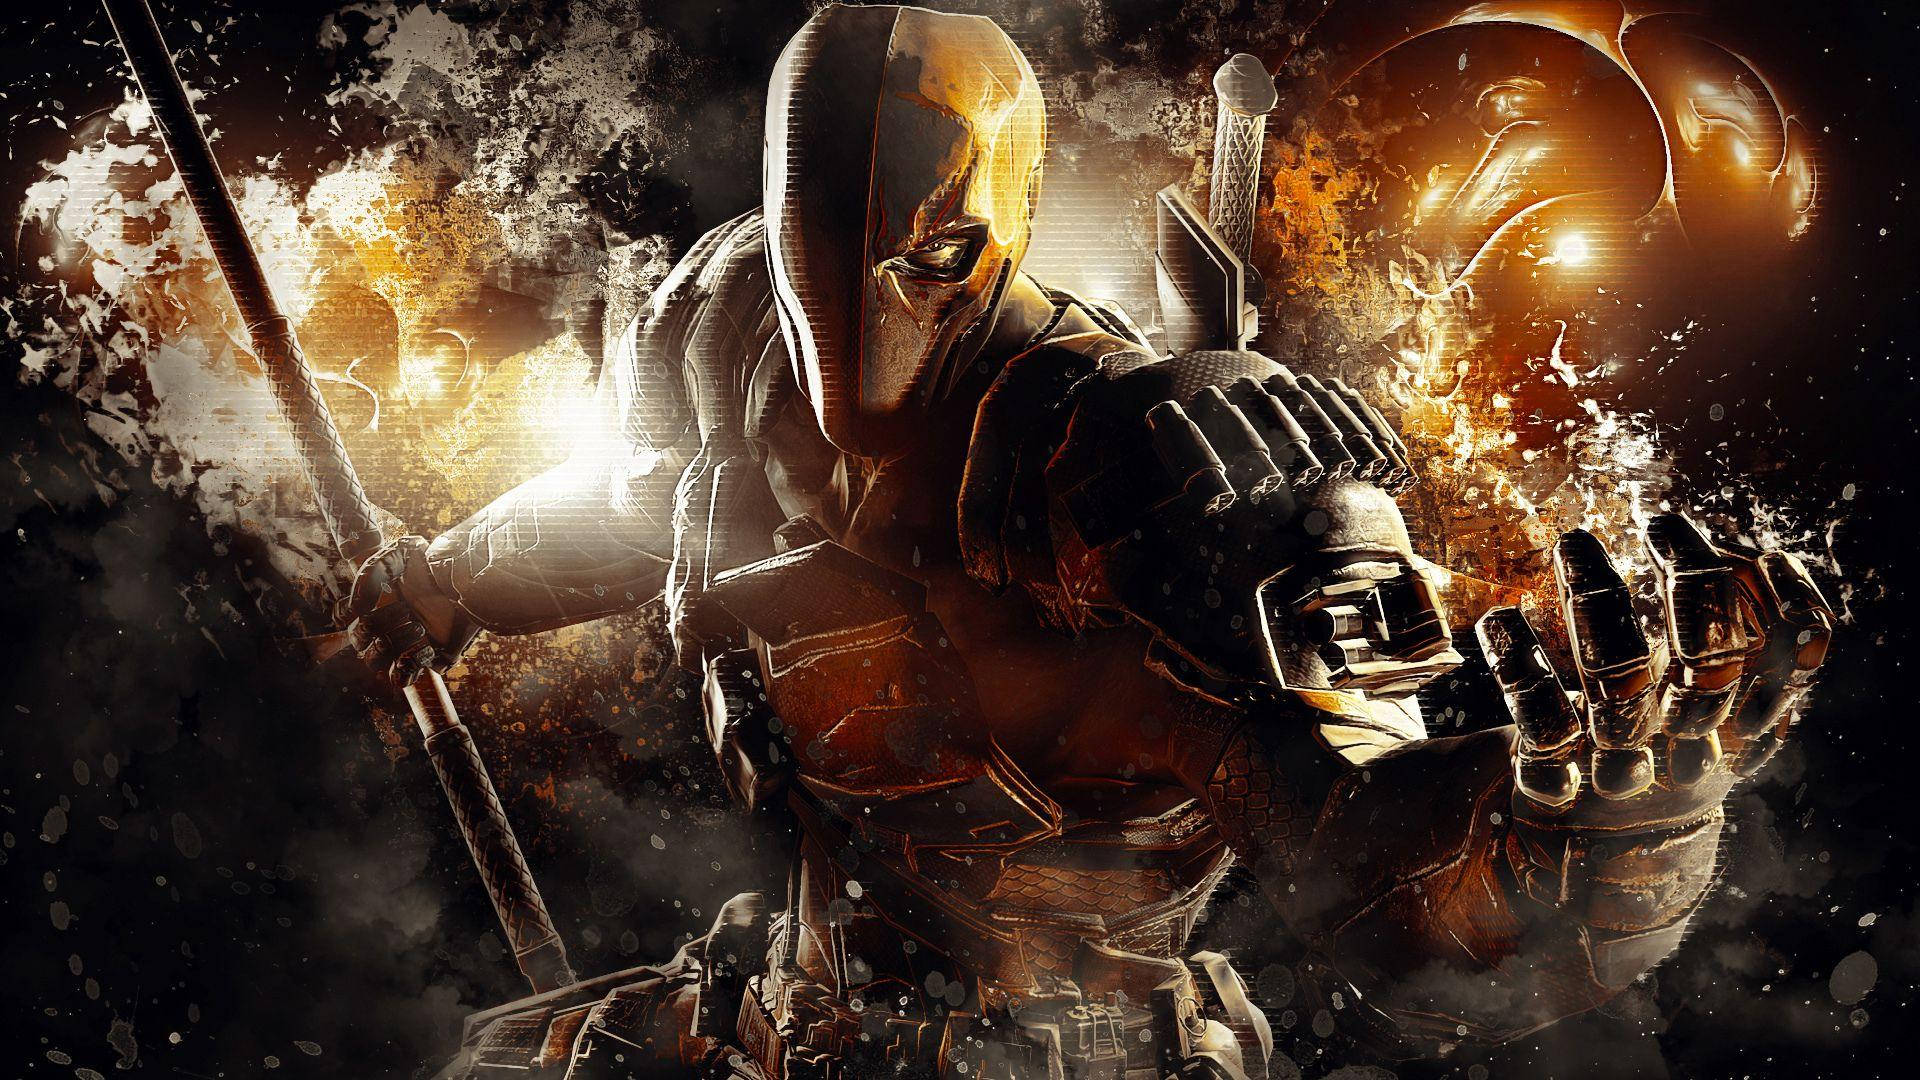 1920x1080 Full Hd Deathstroke Surrounded By Flames